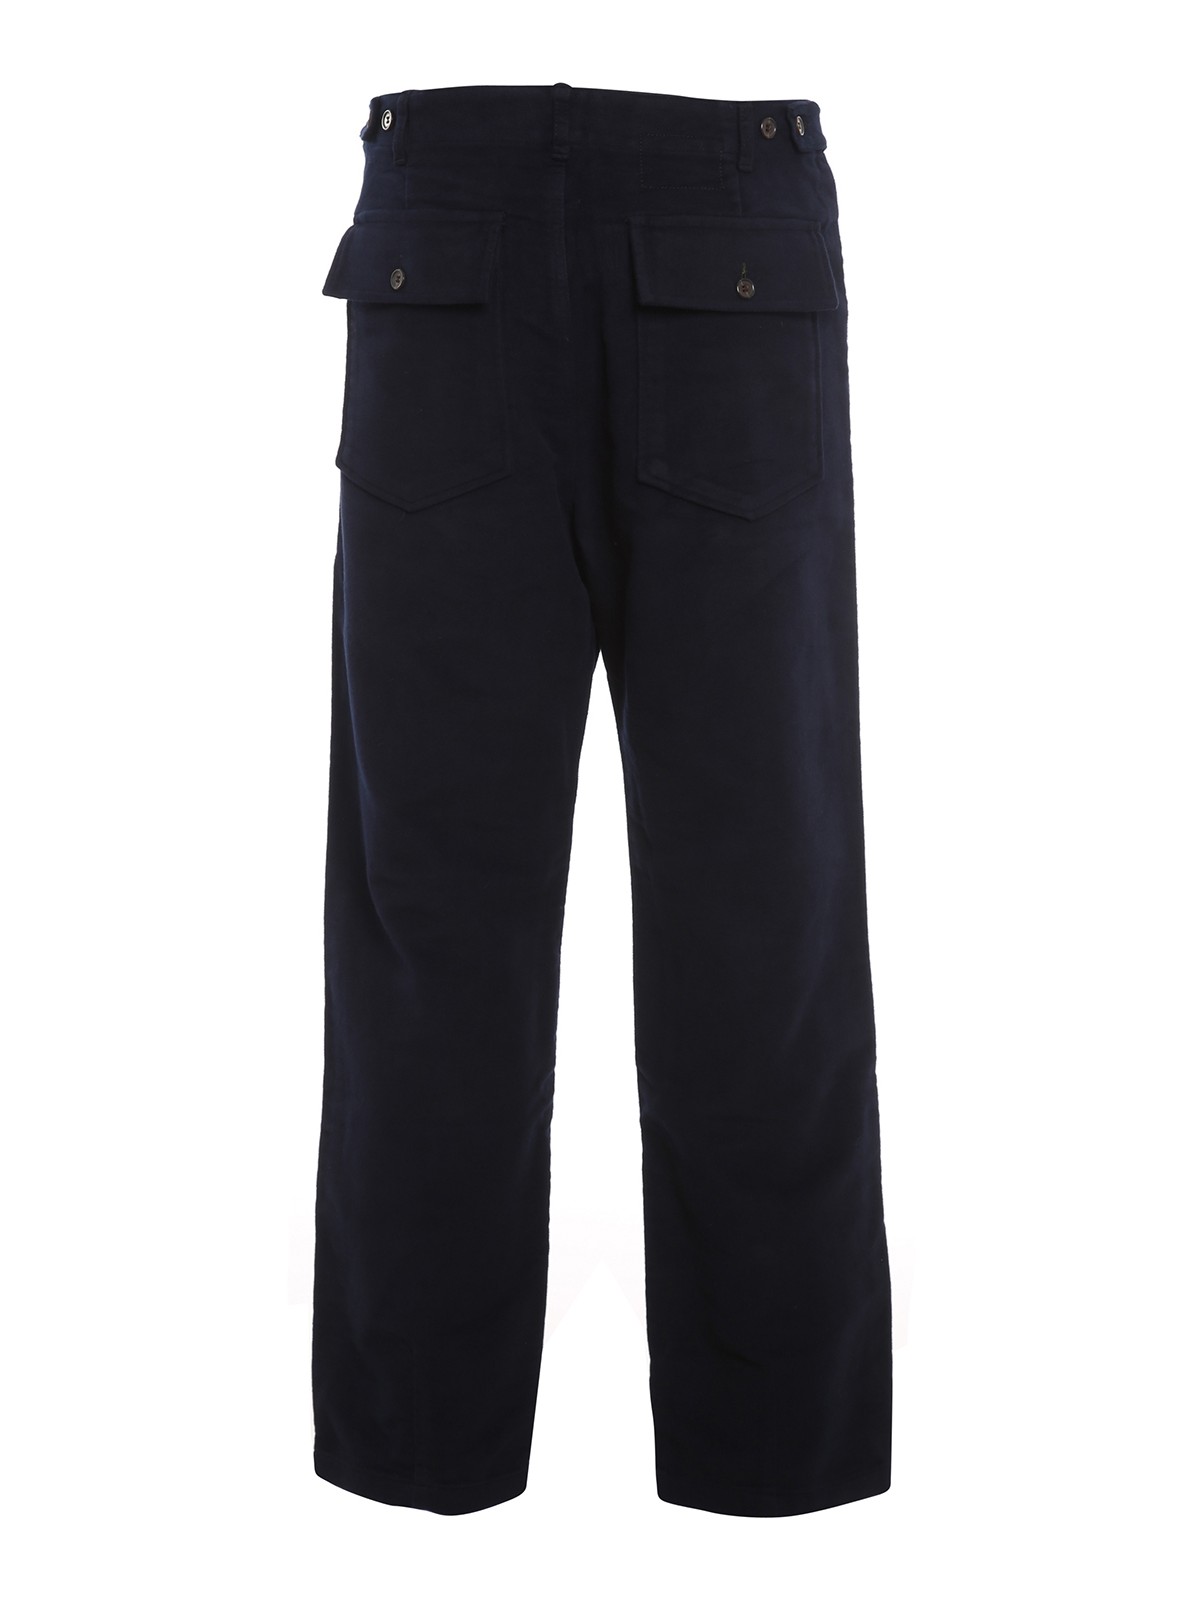 Cotton cargo trousers by Universal Works | Tessabit